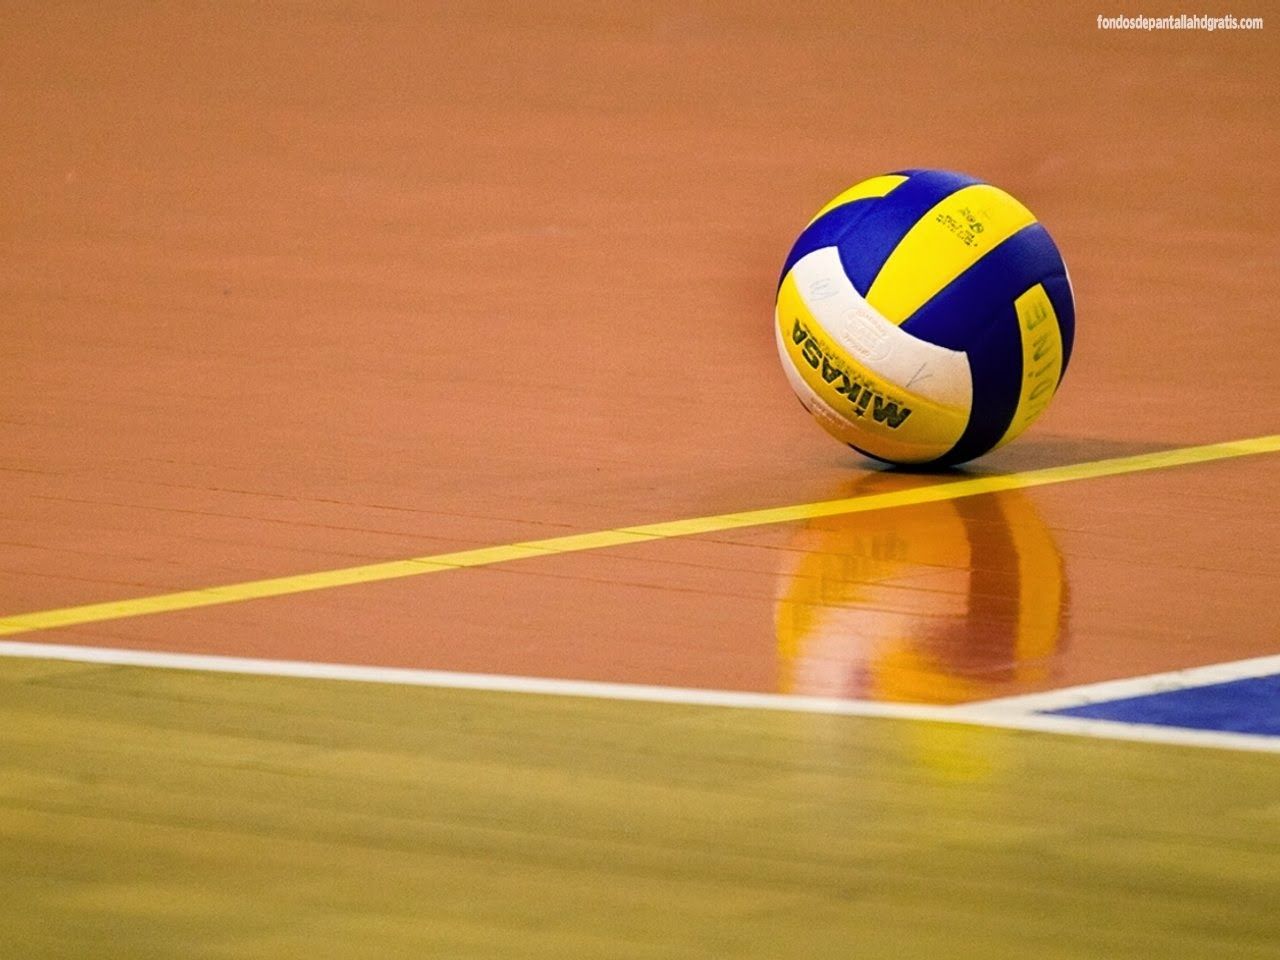 Volleyball Wallpaper Hd Viewing Gallery Xpx Volleyball Wallpapers Wallpaper  Free Download Iphone For Your Phone Background Border Android Graphics Ipad  Wallpaper | Загрузка изображений